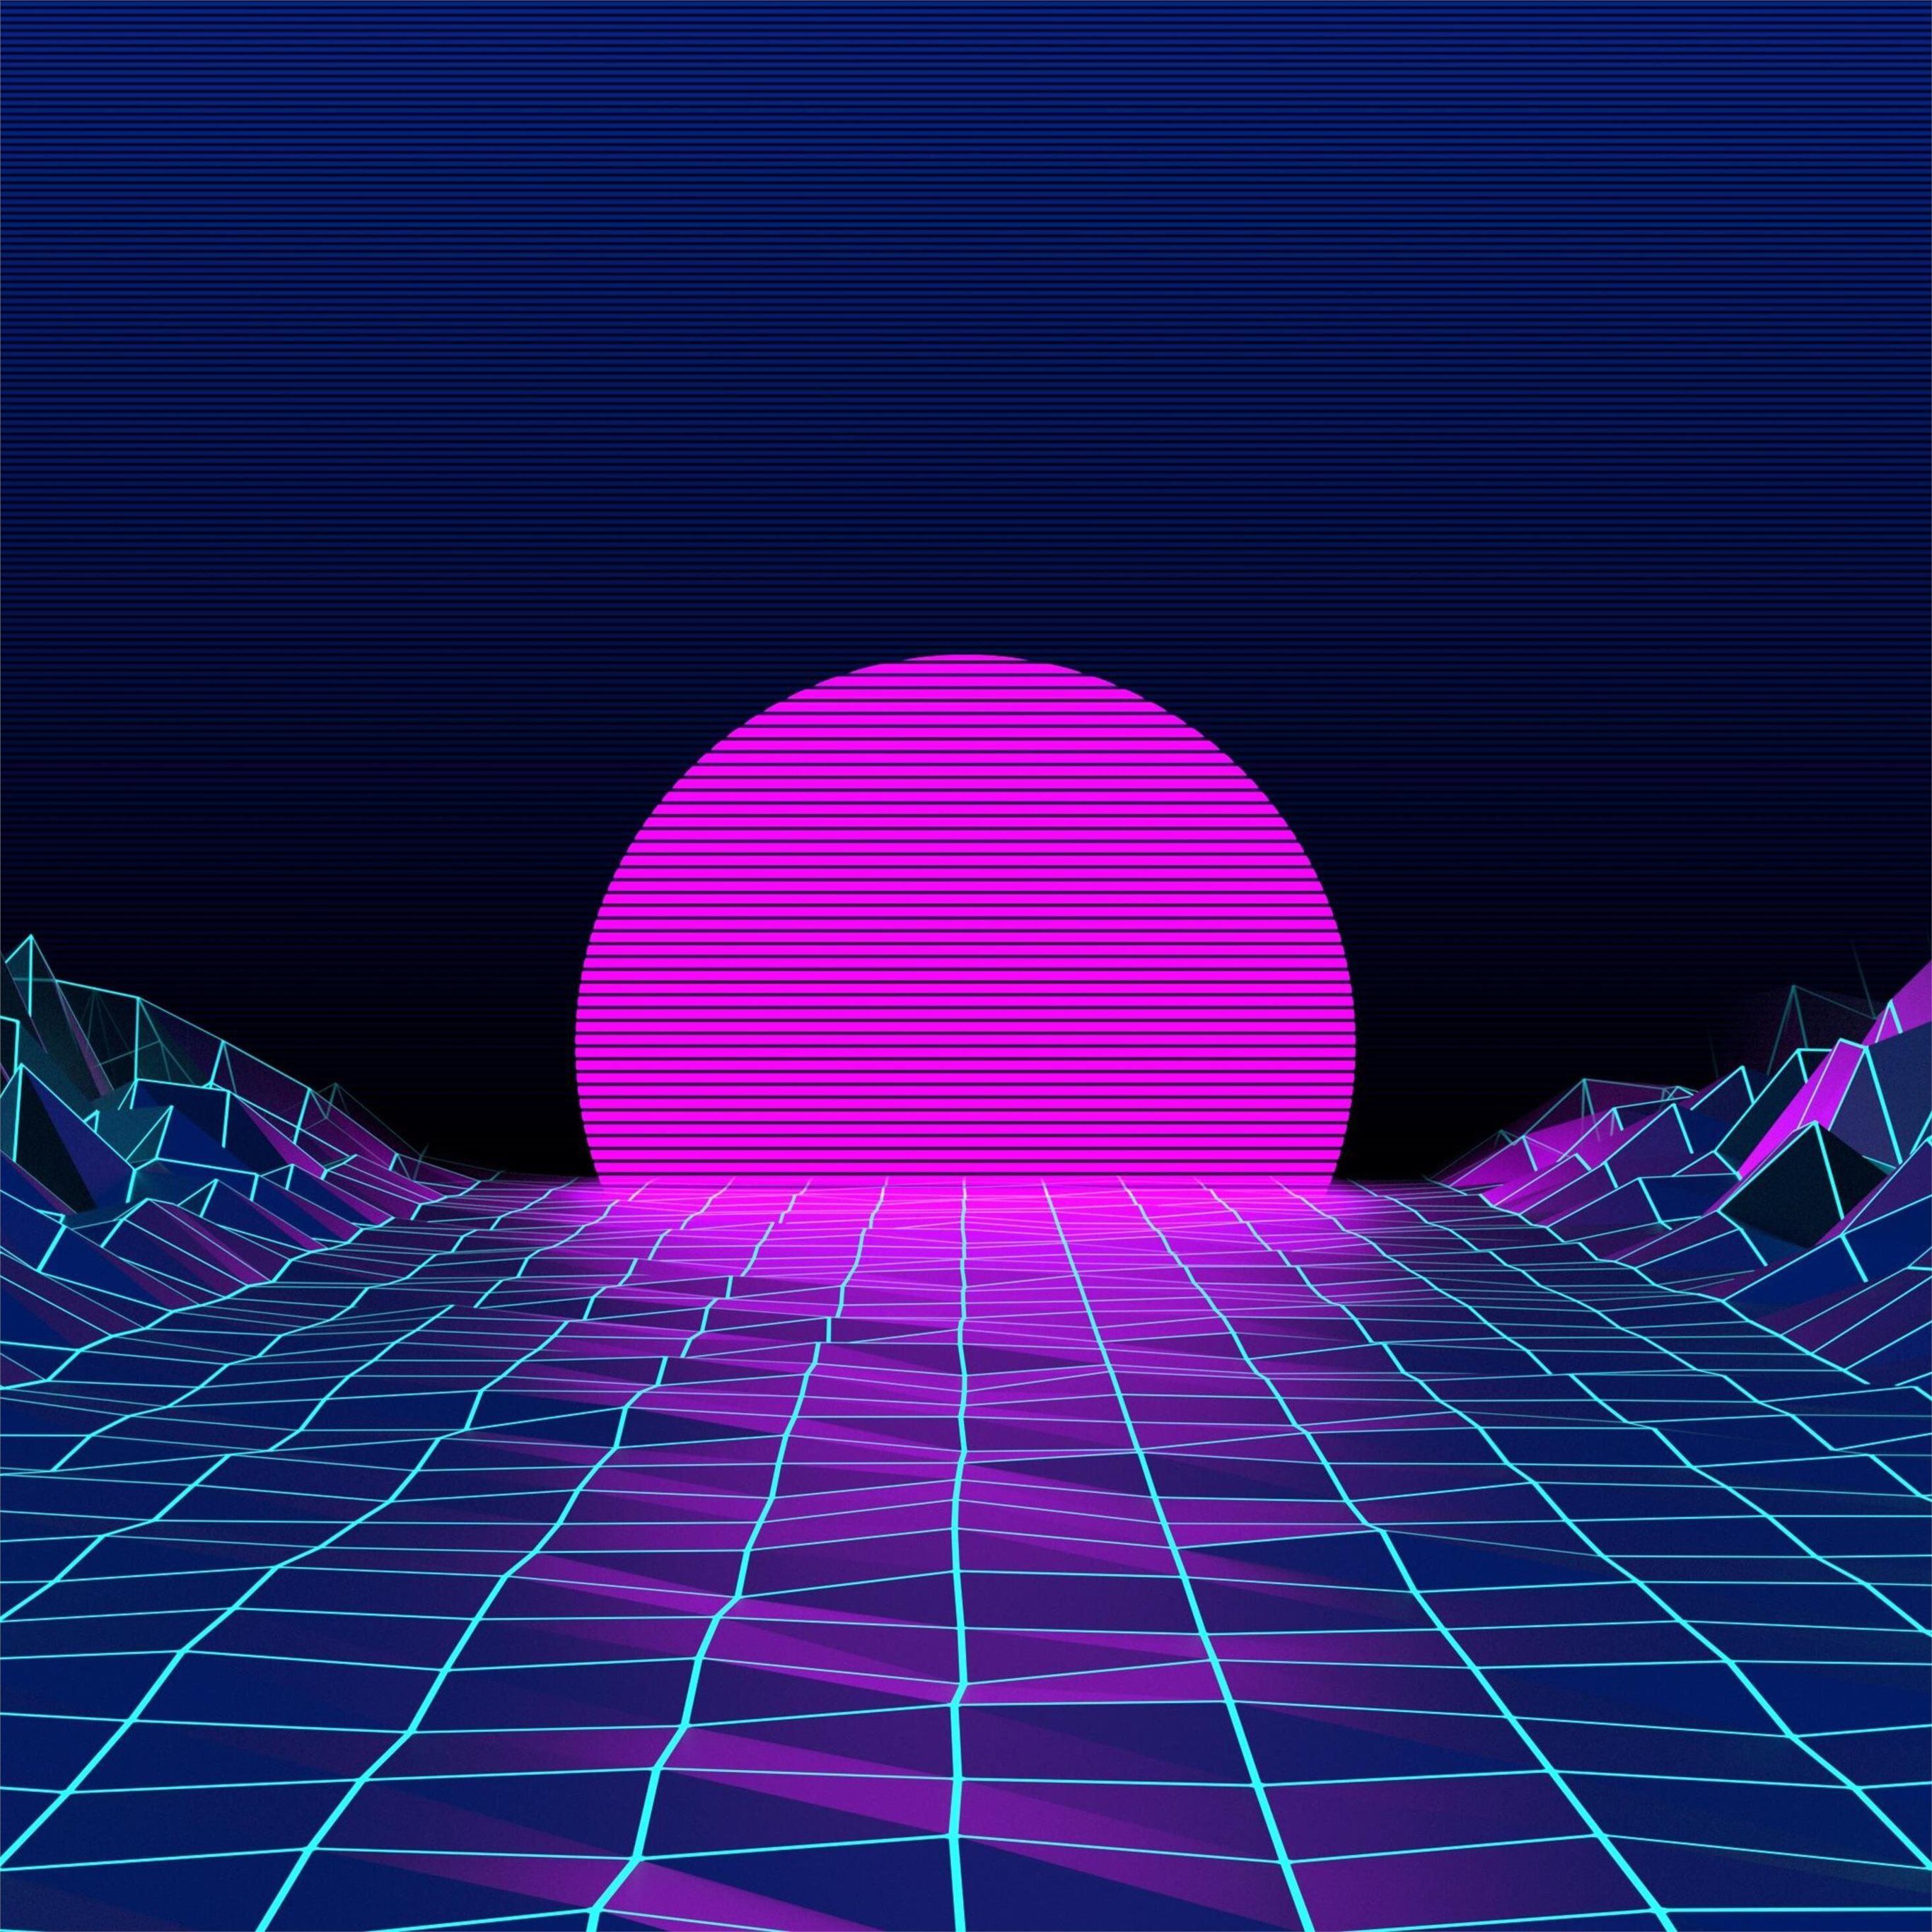 A retro 80s style background with mountains and the sun - Magenta, Aquarius